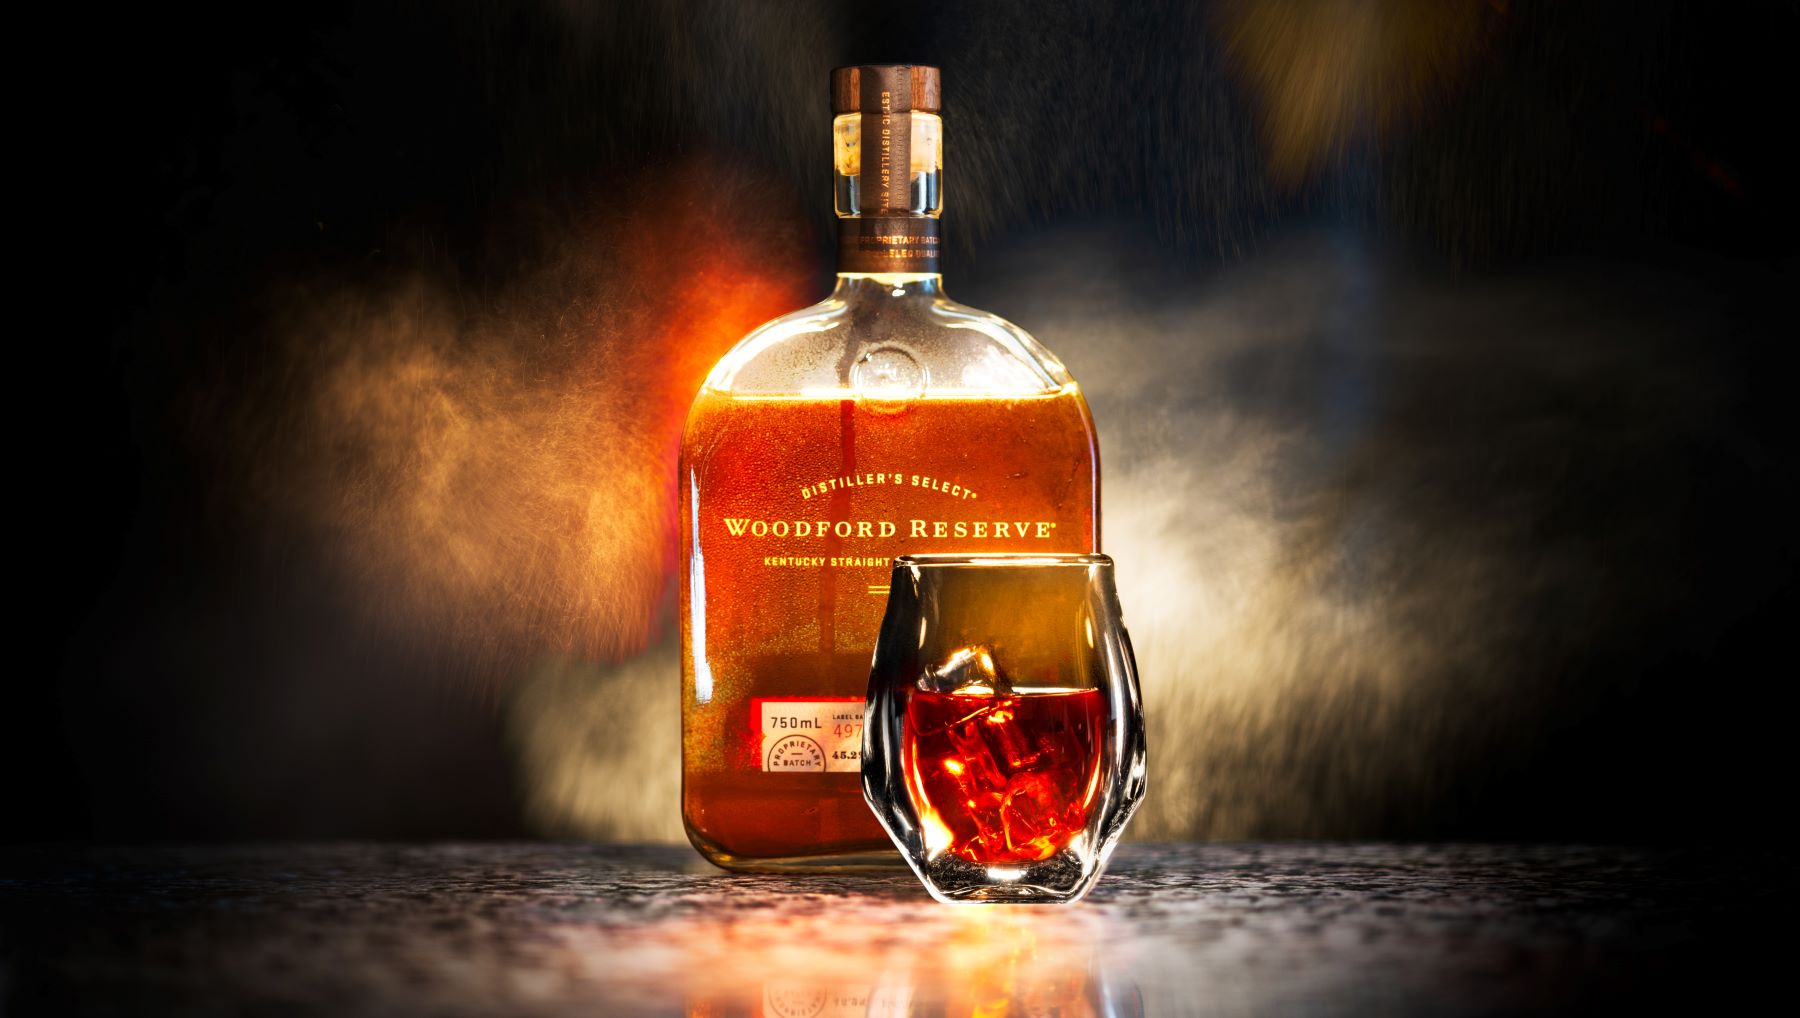 Bottle and glass of Woodford Reserve bourbon